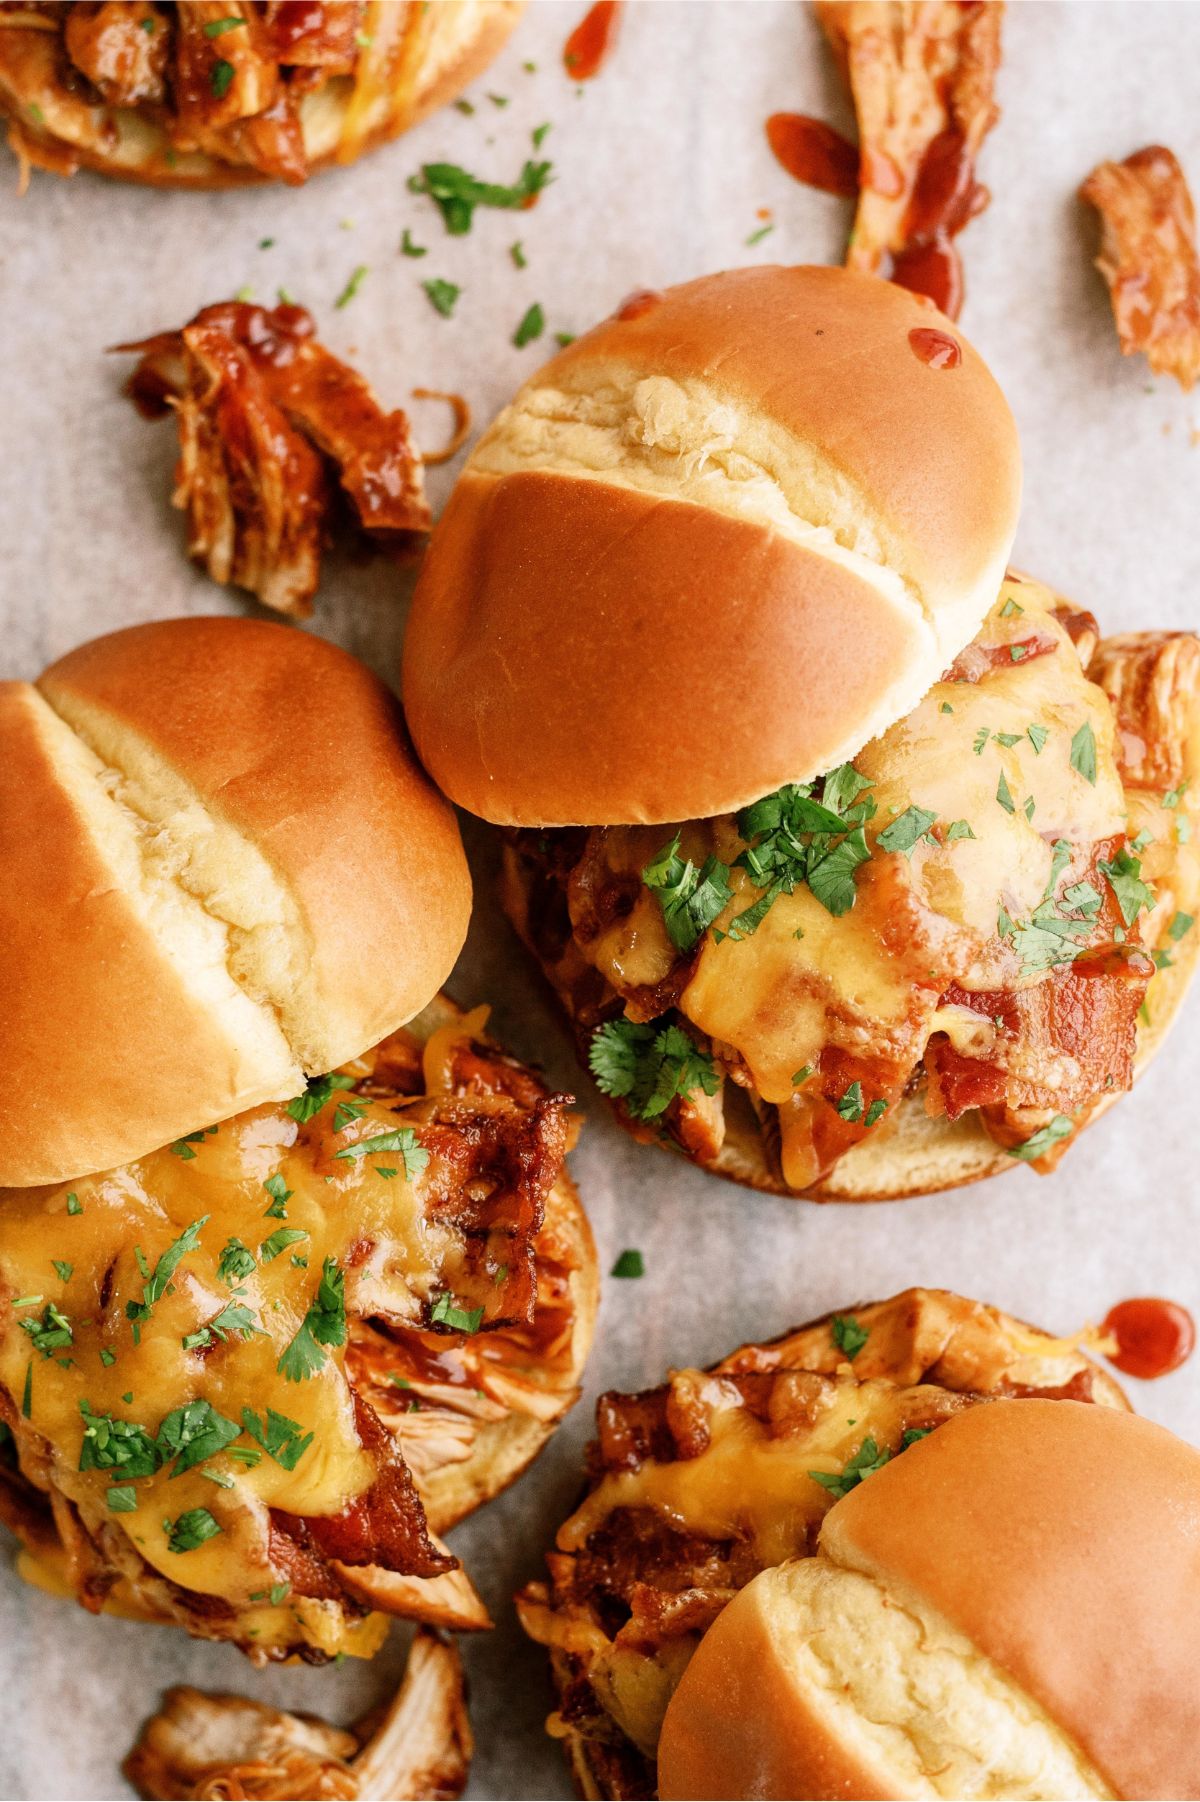 Top view of 3 Slow Cooker Cheesy BBQ Chicken Bacon Sandwiches